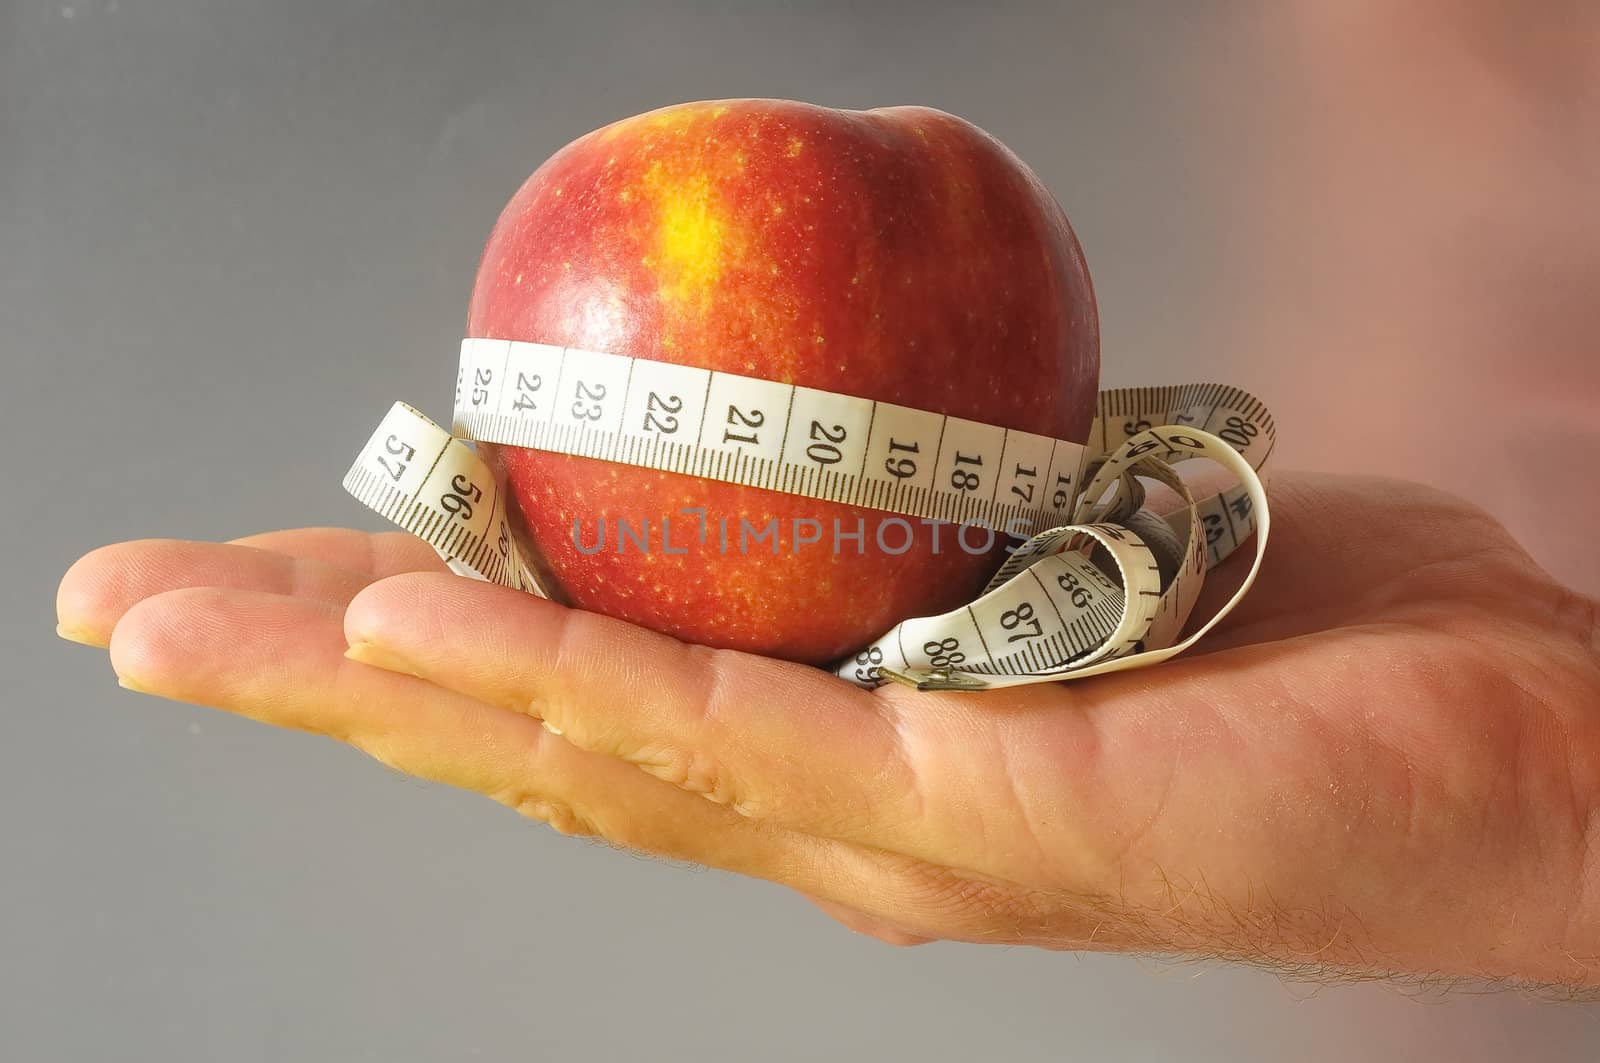 Diet Apple and Meter on the Hand a Colored Background